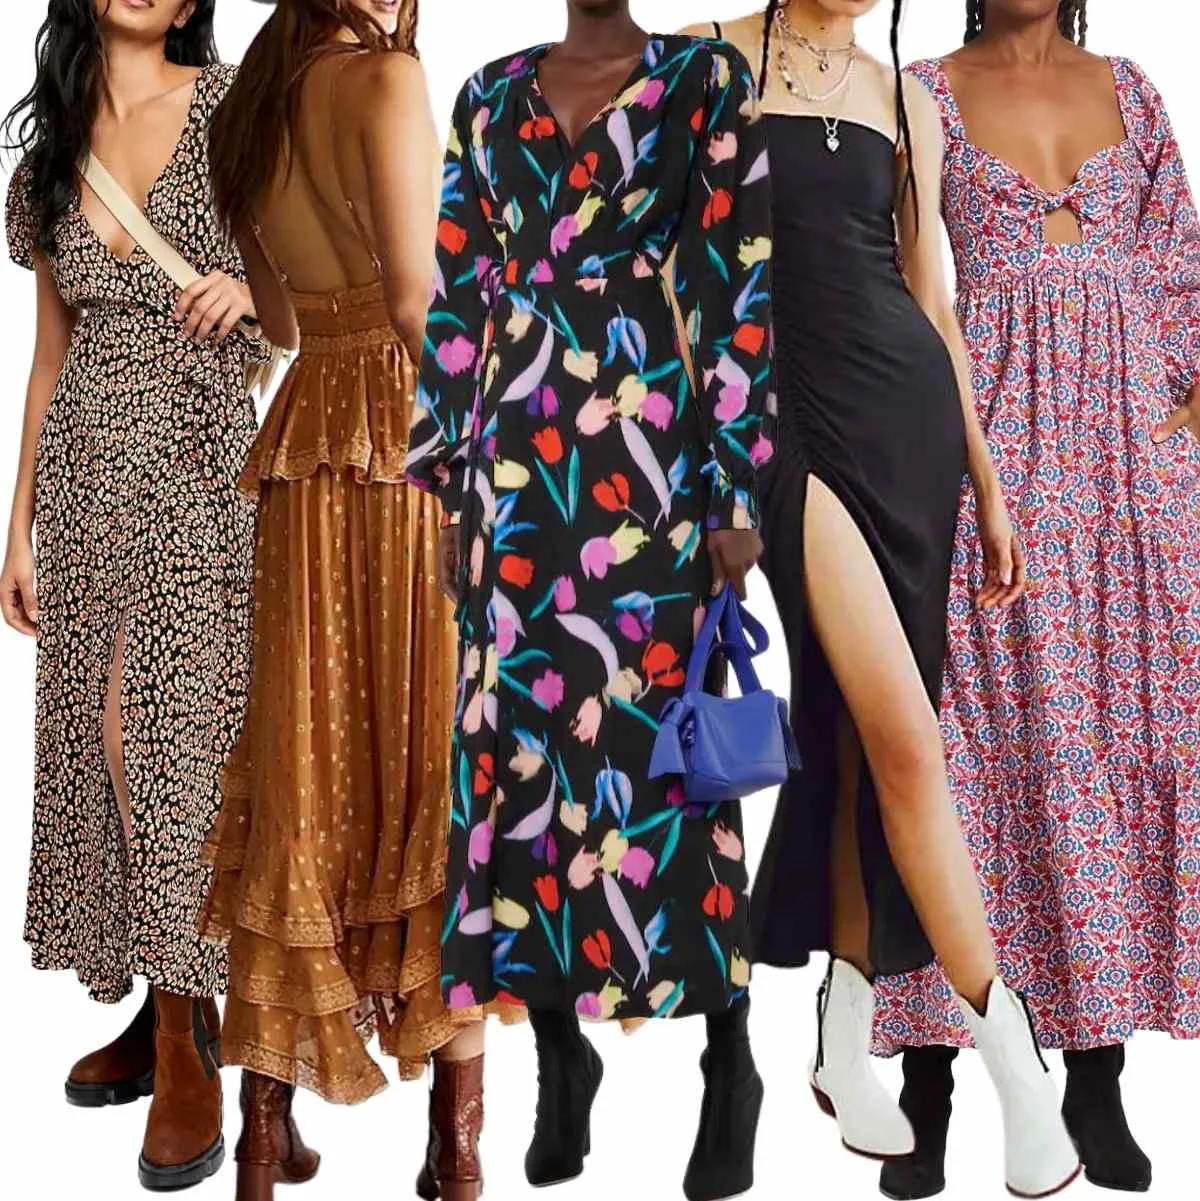 Collage of 5 women wearing different maxi dresses with ankle boots.